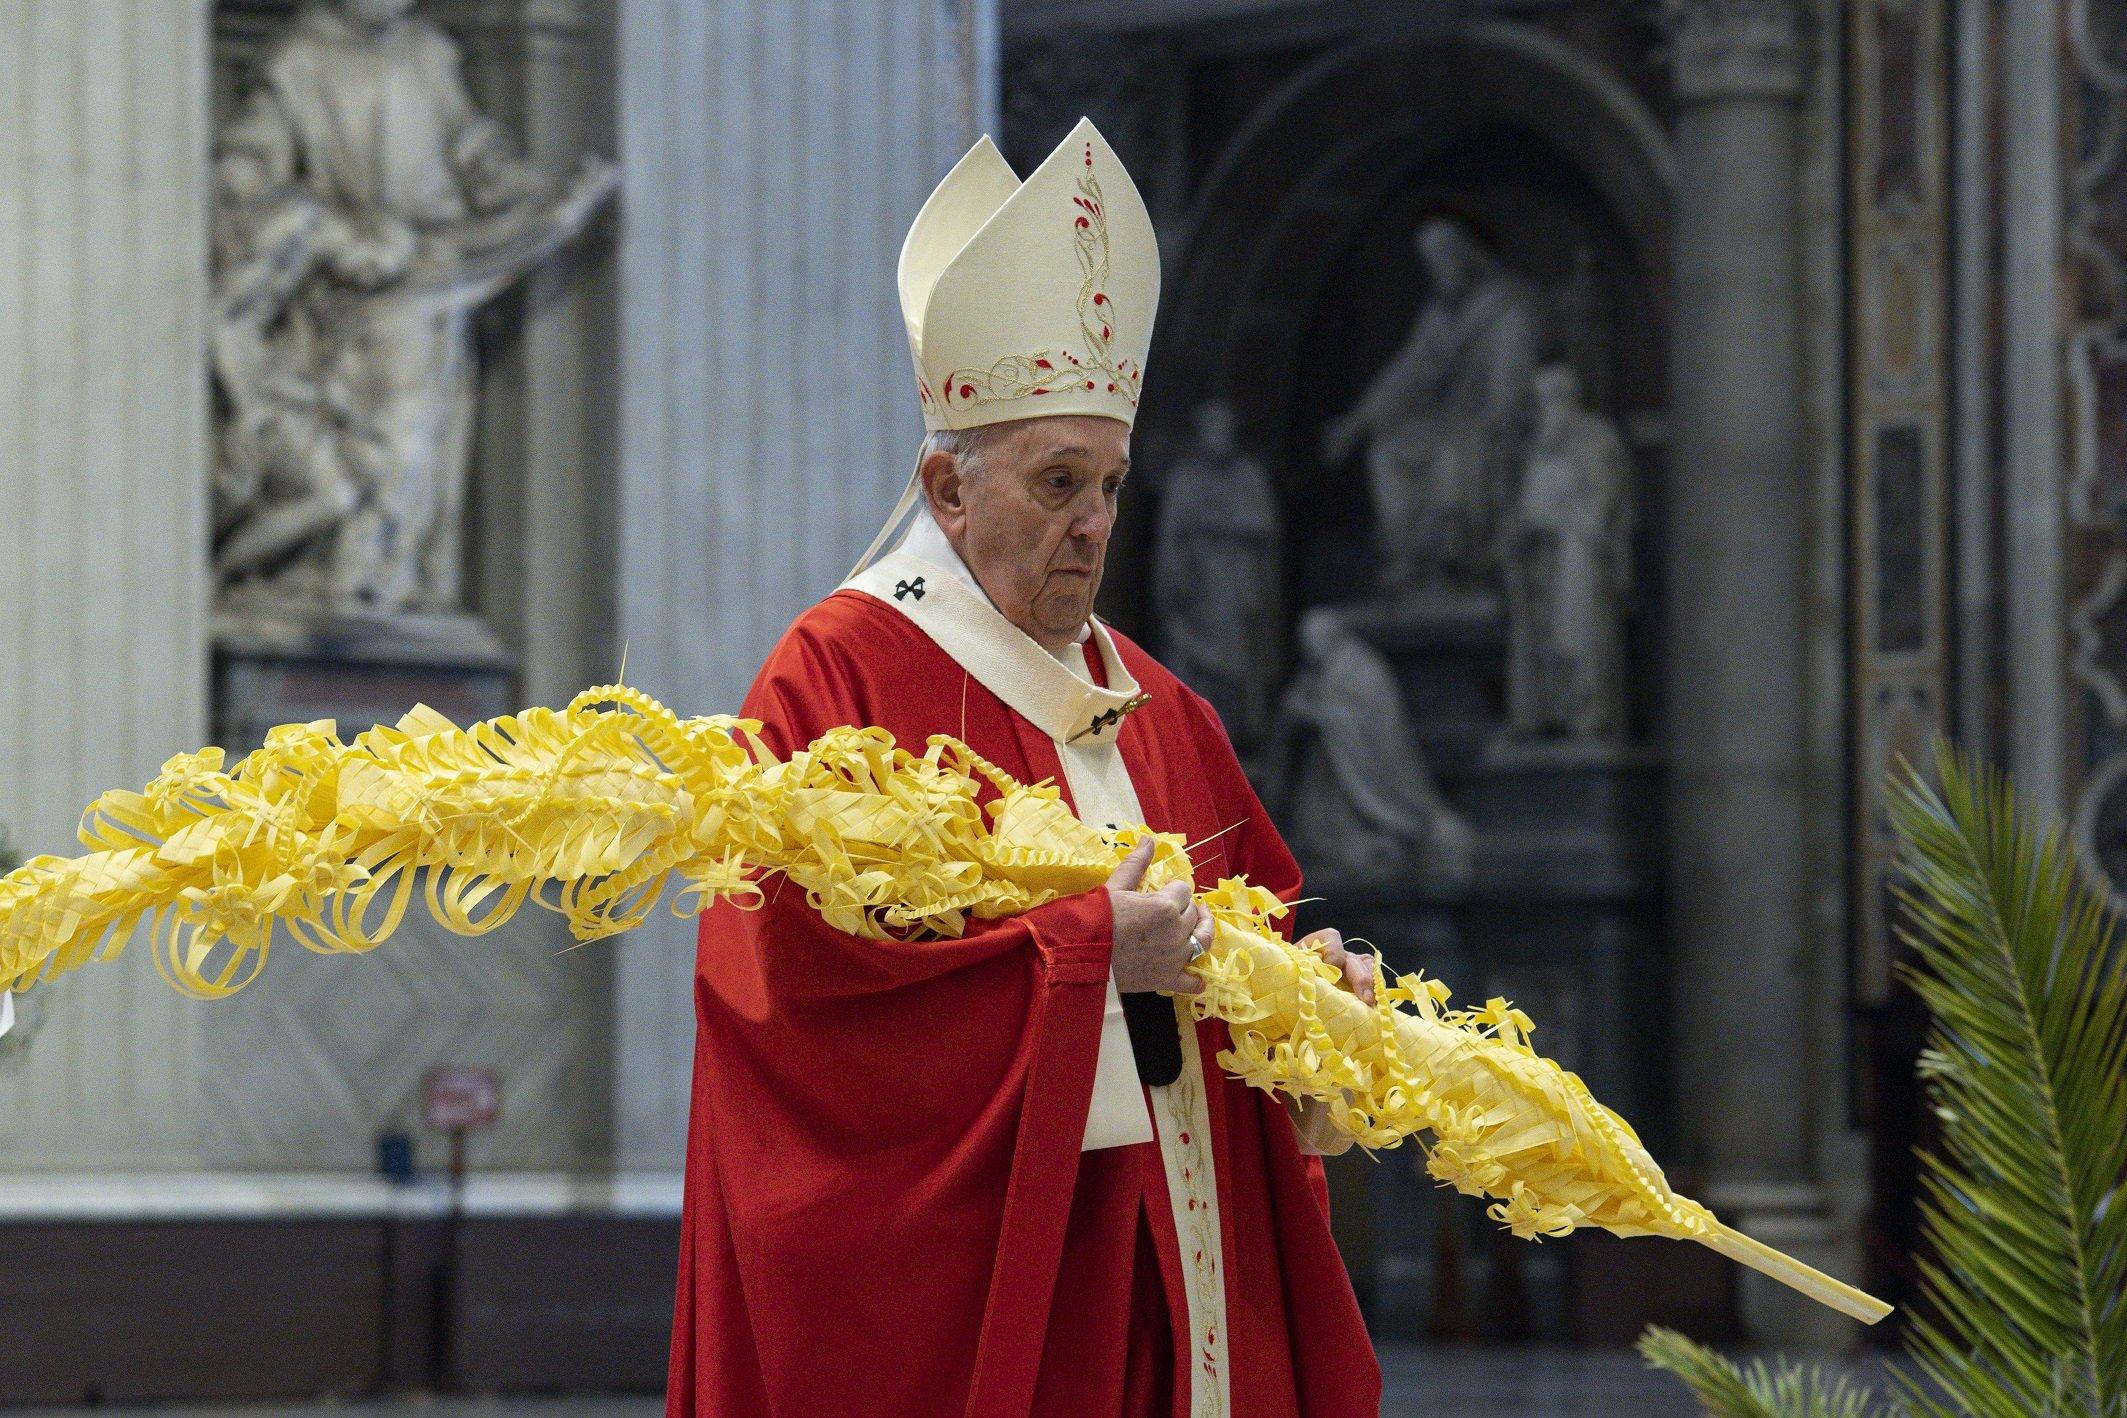 To admire Jesus is not enough, says Pope on Palm Sunday